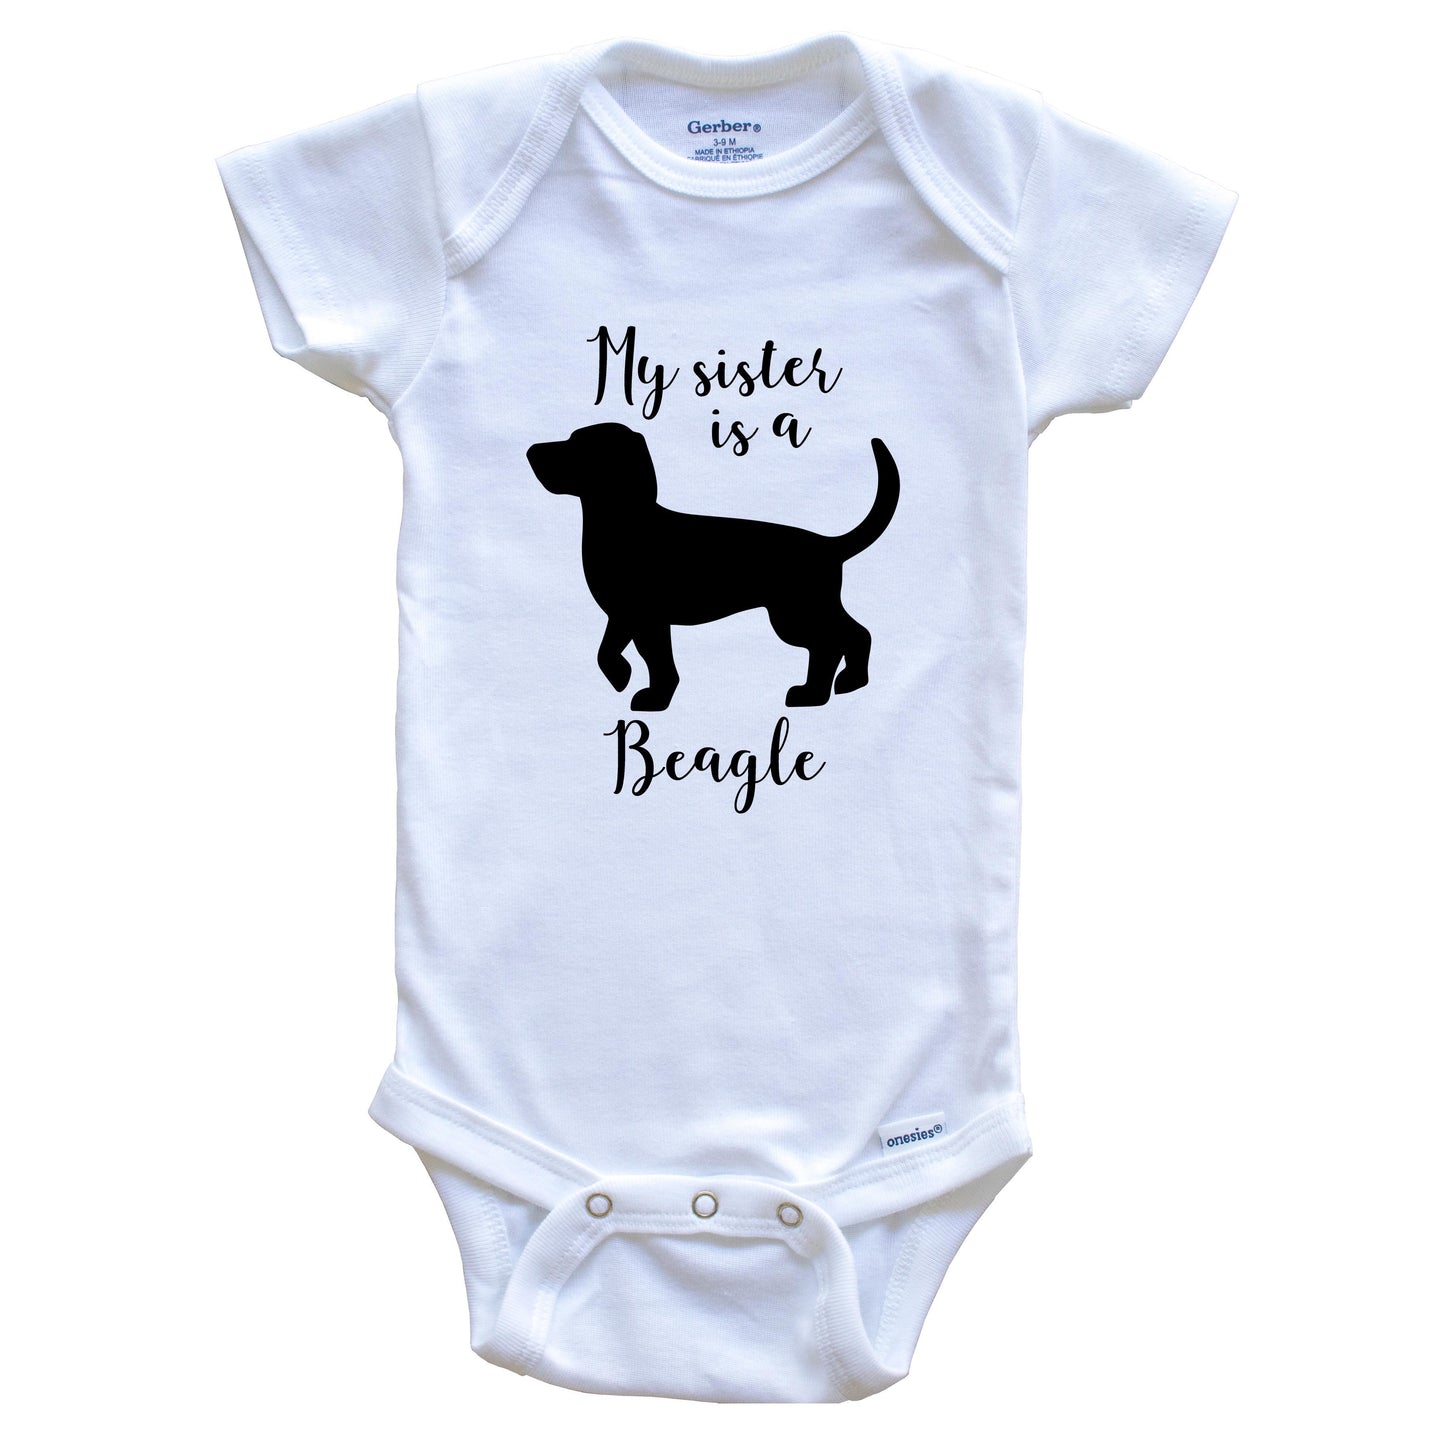 My Sister Is A Beagle Cute Dog Baby Onesie - Beagle One Piece Baby Bodysuit